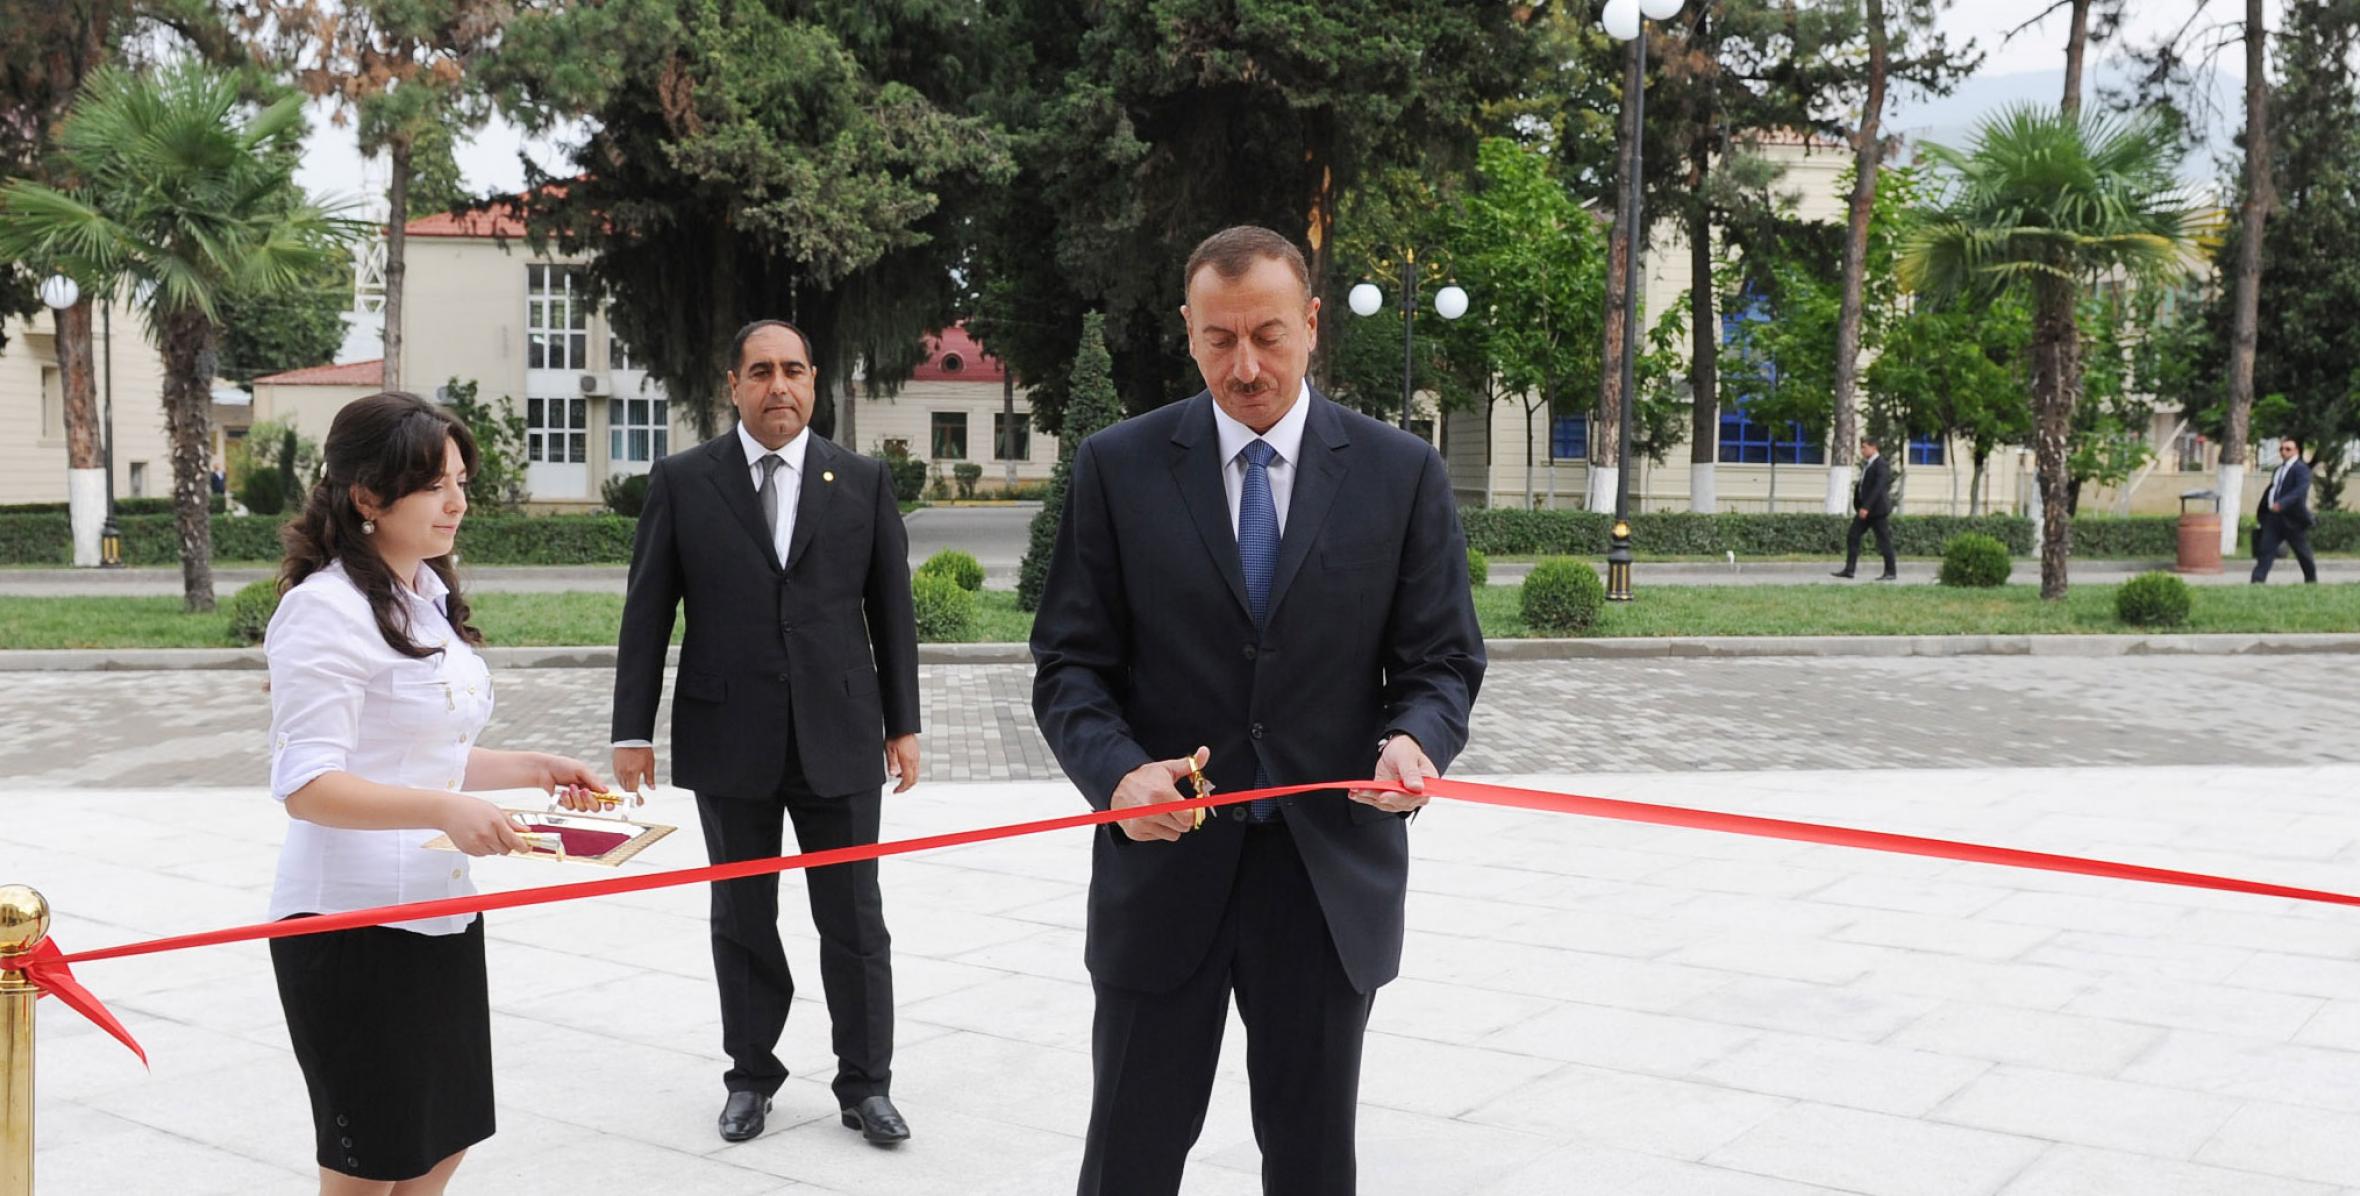 Ilham Aliyev attended the opening of the Balakan District Culture Center